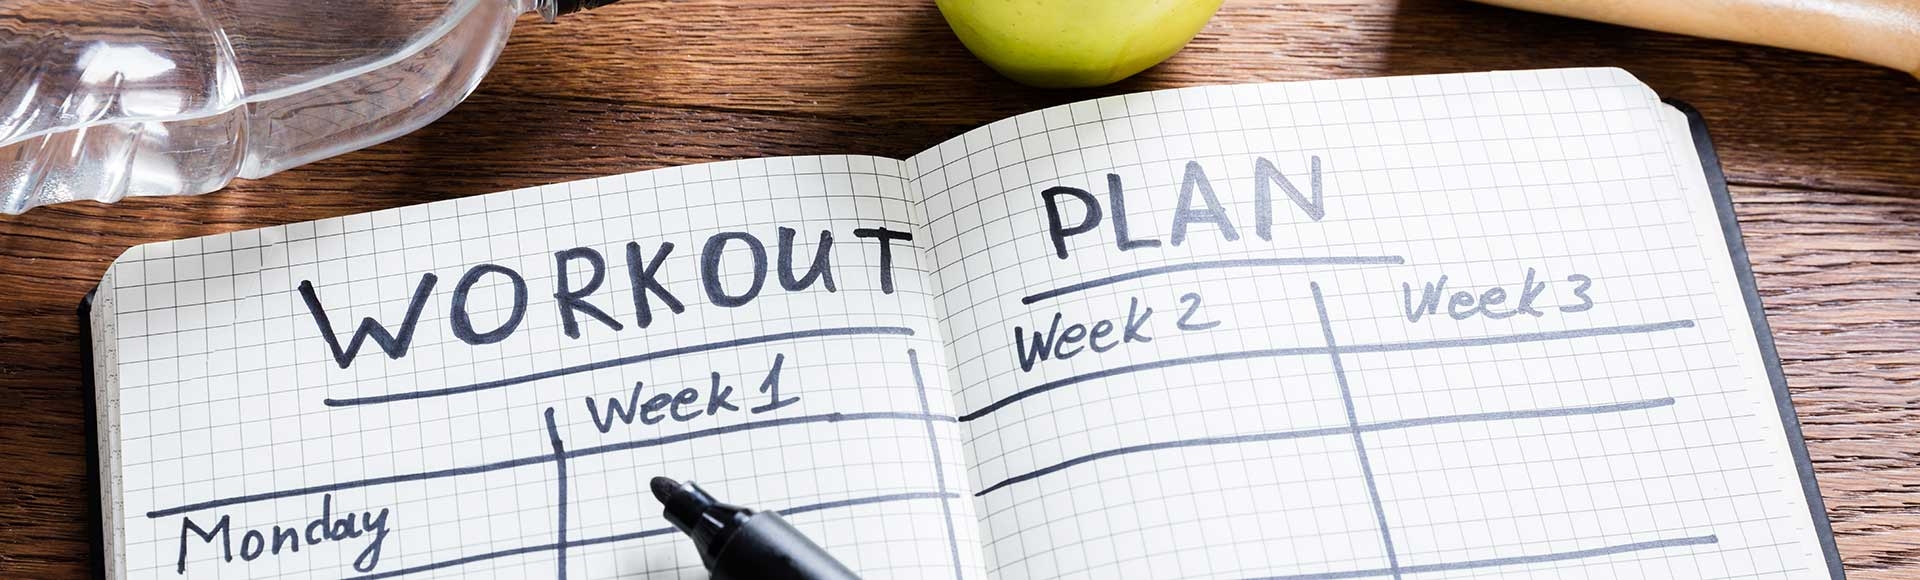 How To Create Your Own Workout Schedule